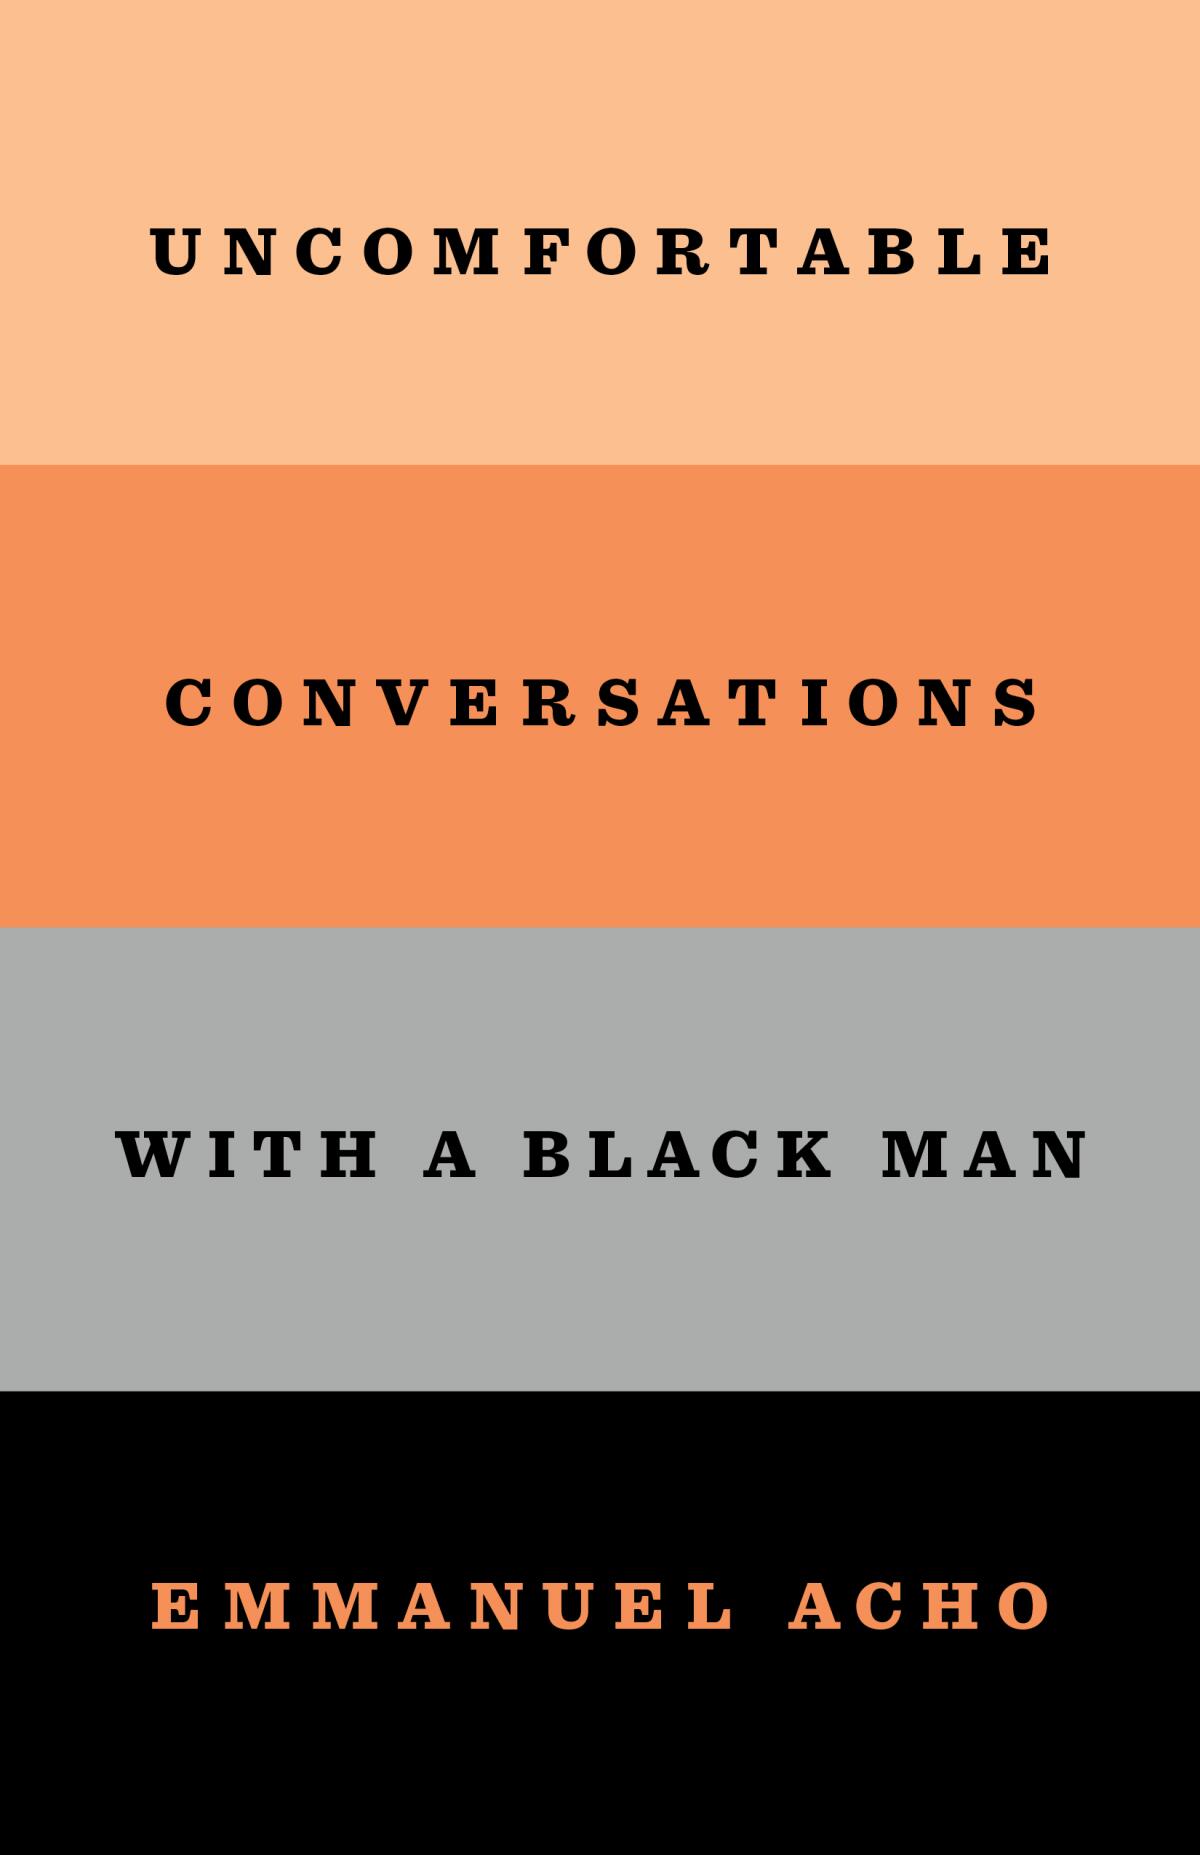 Cover of the book "Uncomfortable Conversations With a Black Man."